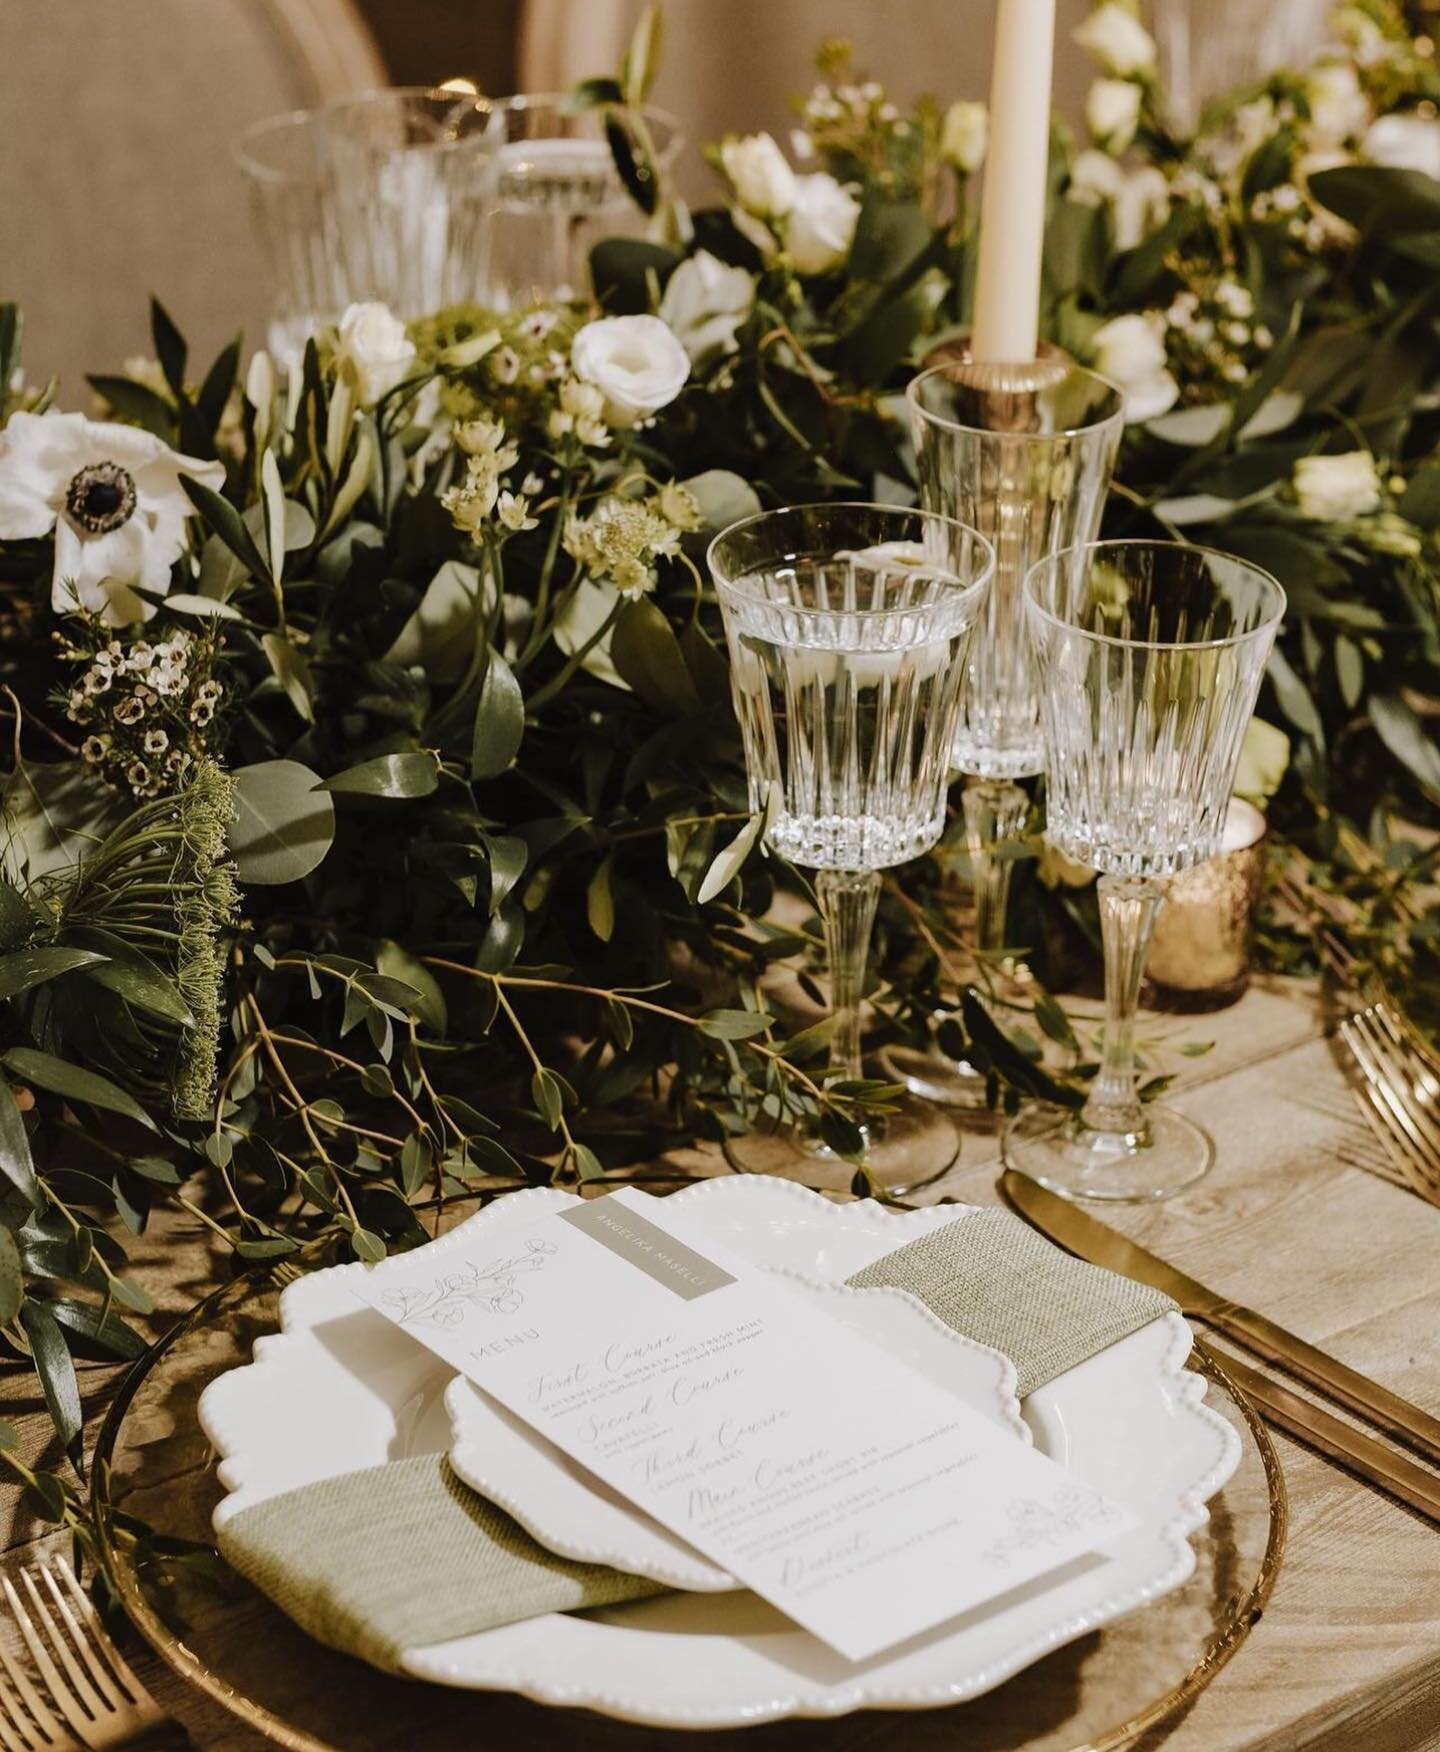 Thinking about wedding day stationery? Having custom menu cards at your wedding is the perfect way to compliment your table setting while also sharing your meal selection with your guests. ✨